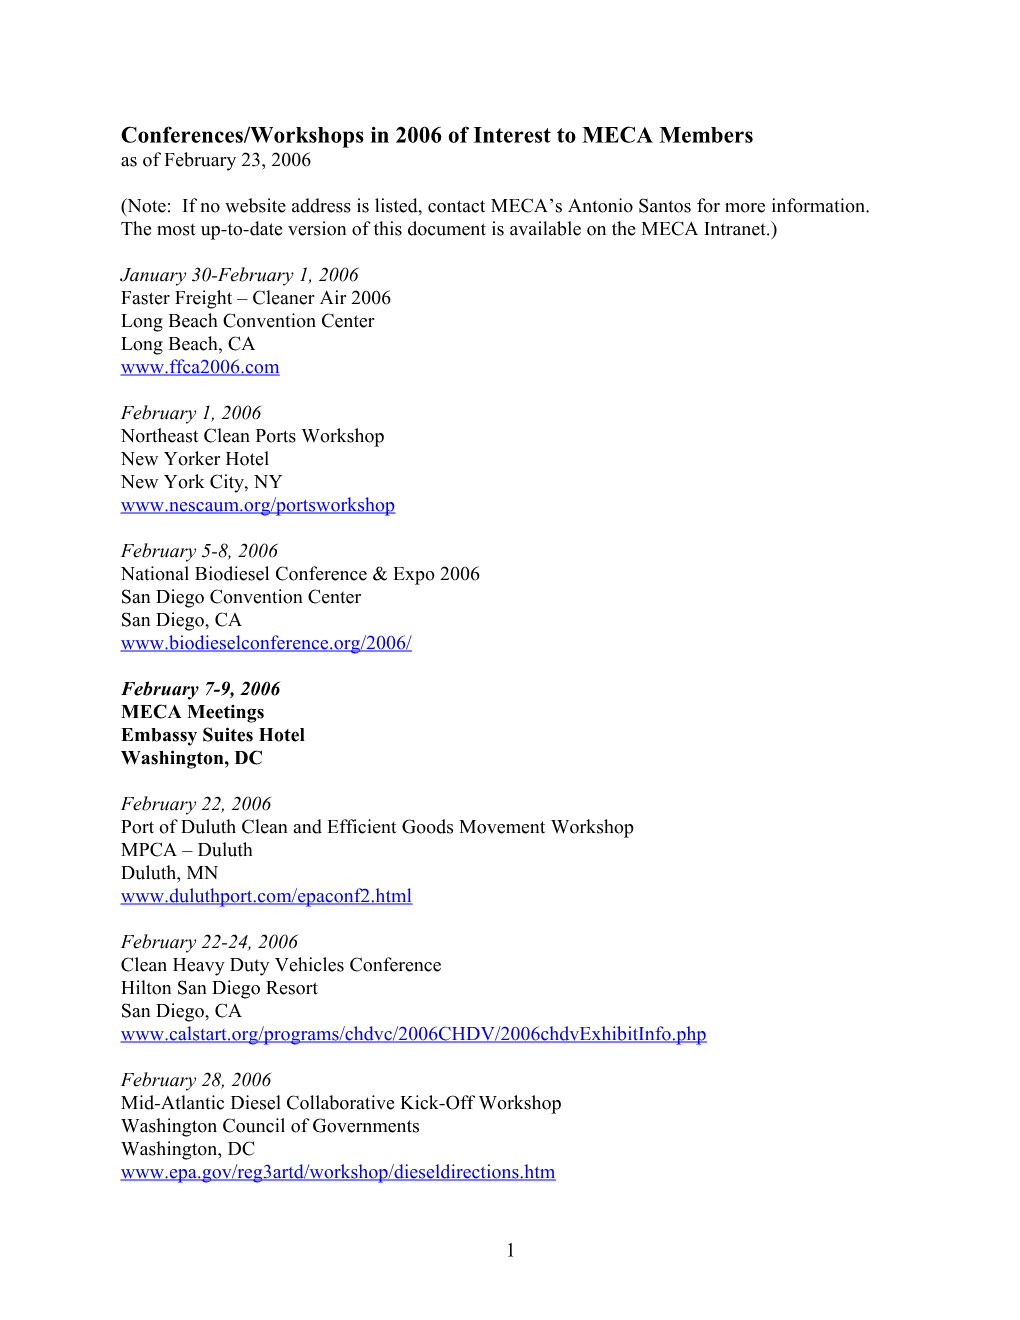 Conferences/Workshops in 2006 of Interest to MECA Members